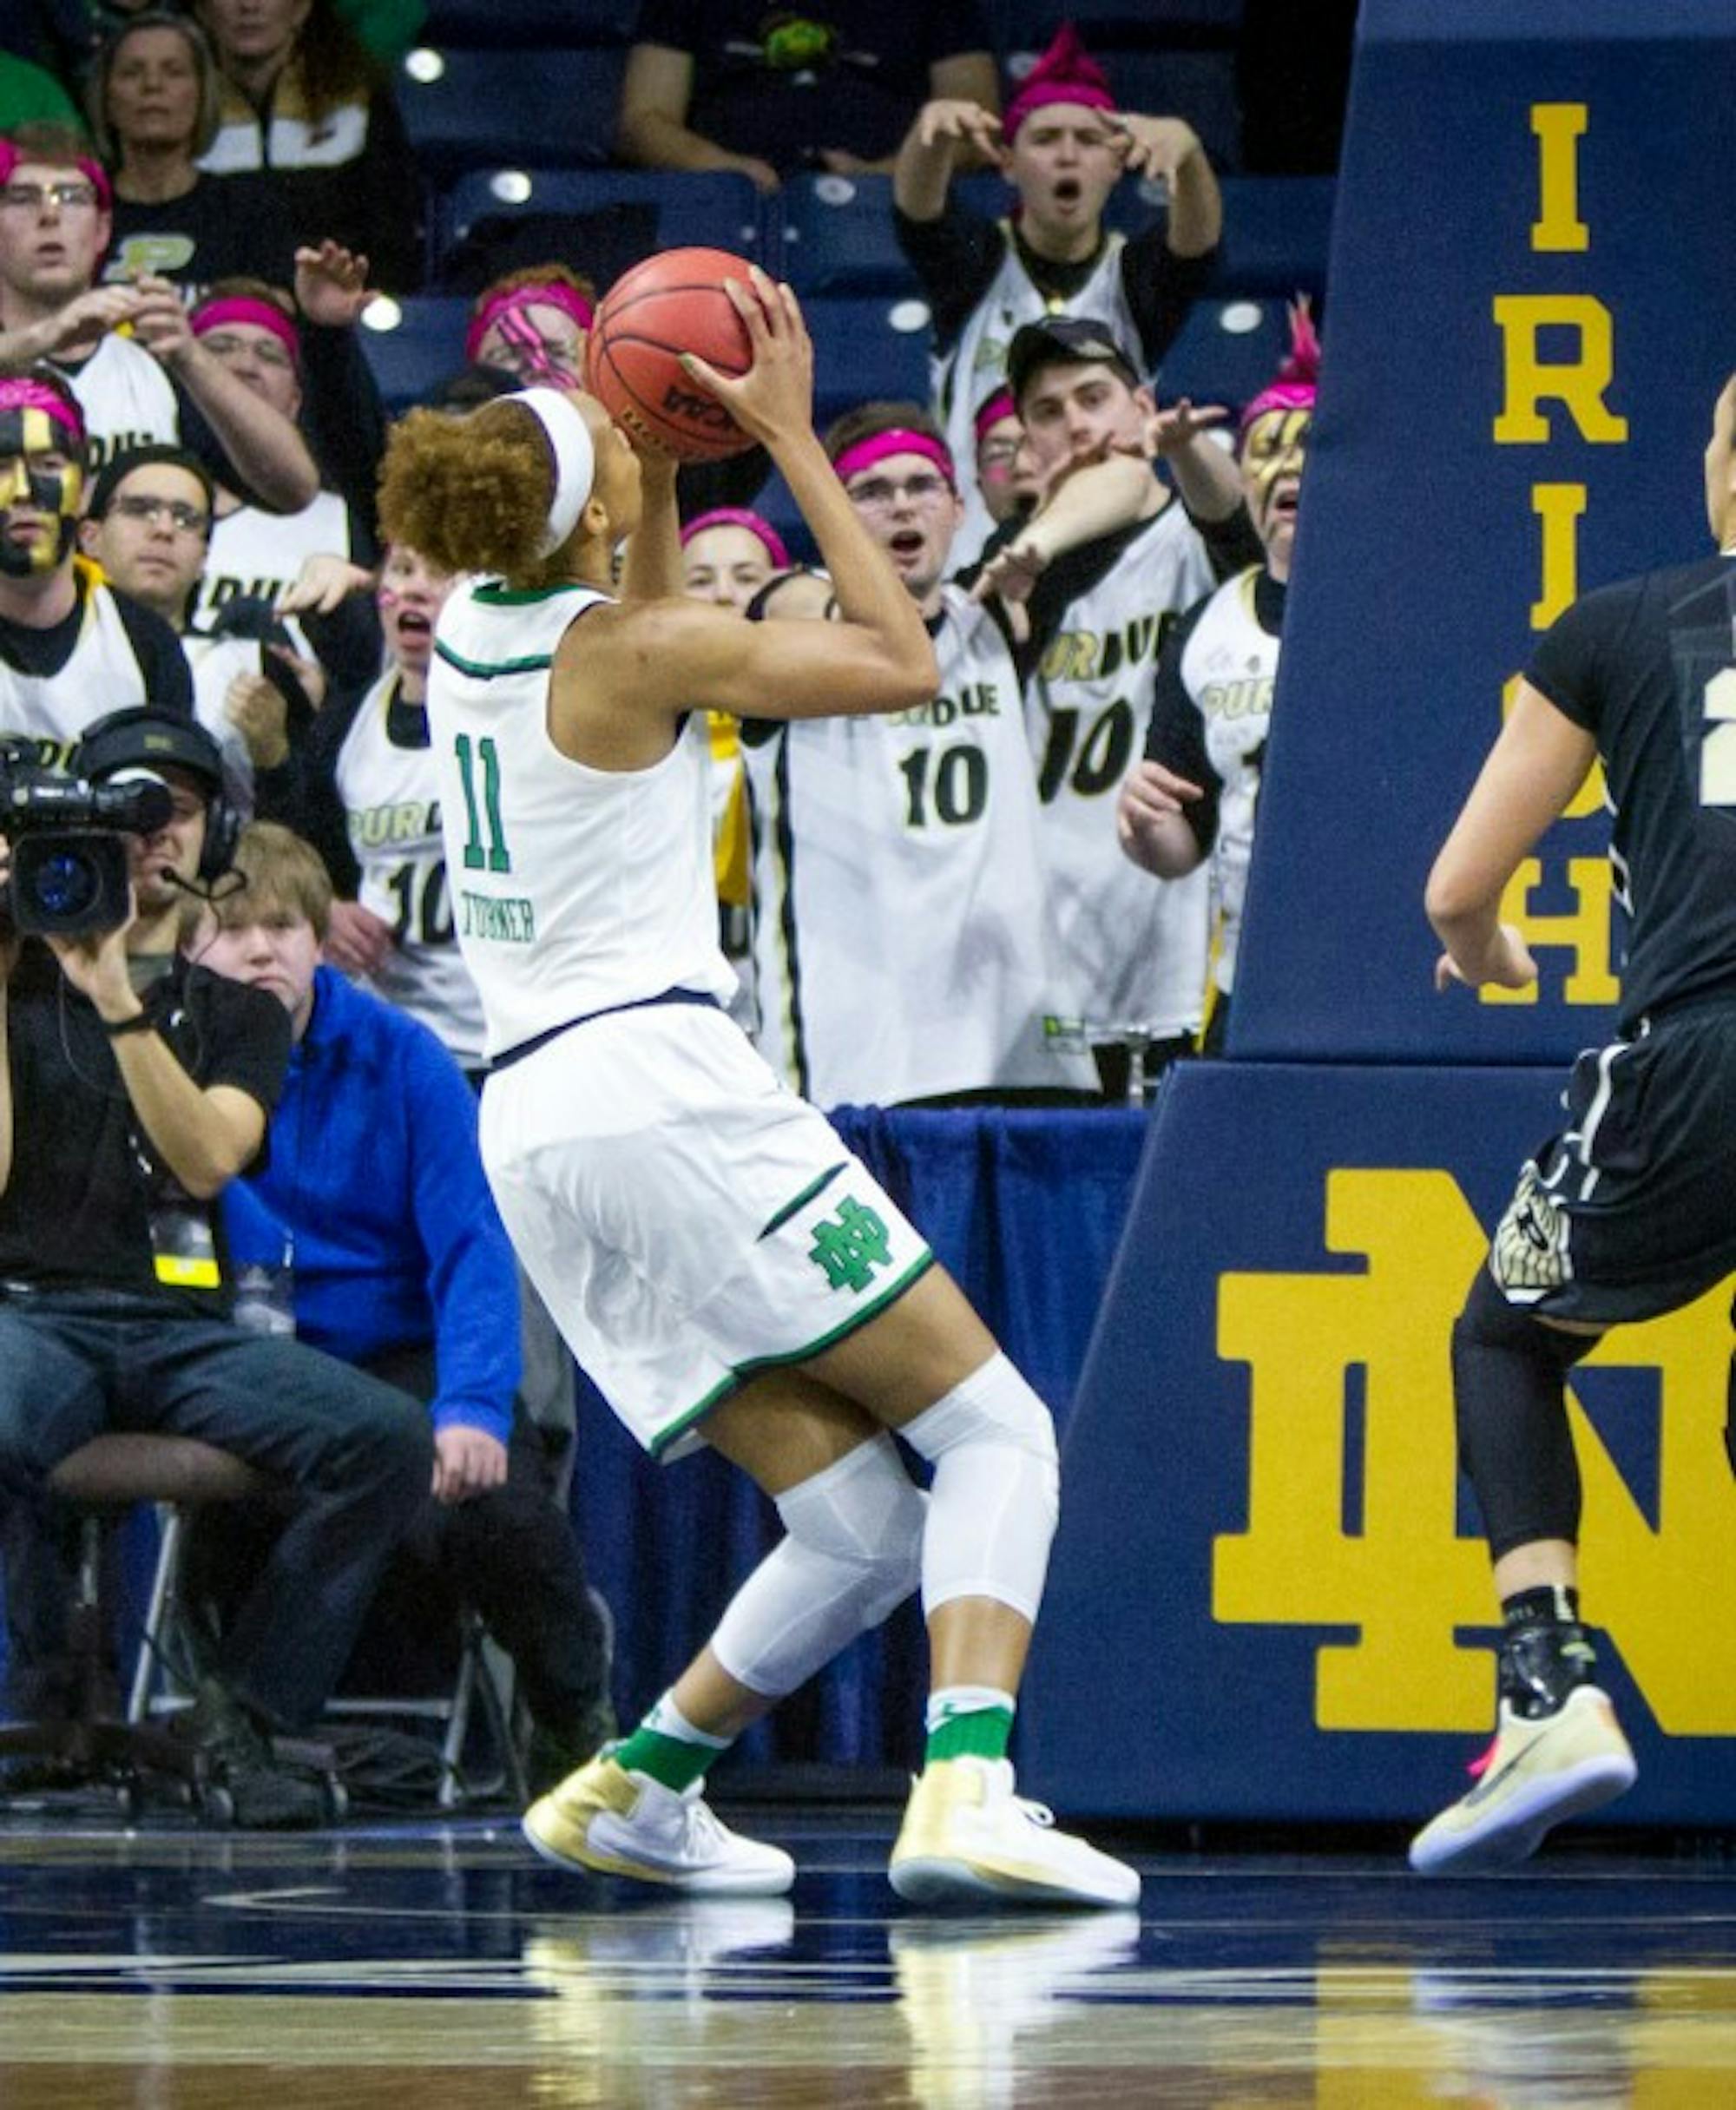 Irish junior Brianna Turner goes up for the layup moments before injuring herself during Notre Dame’s 88-82 win over Purdue.